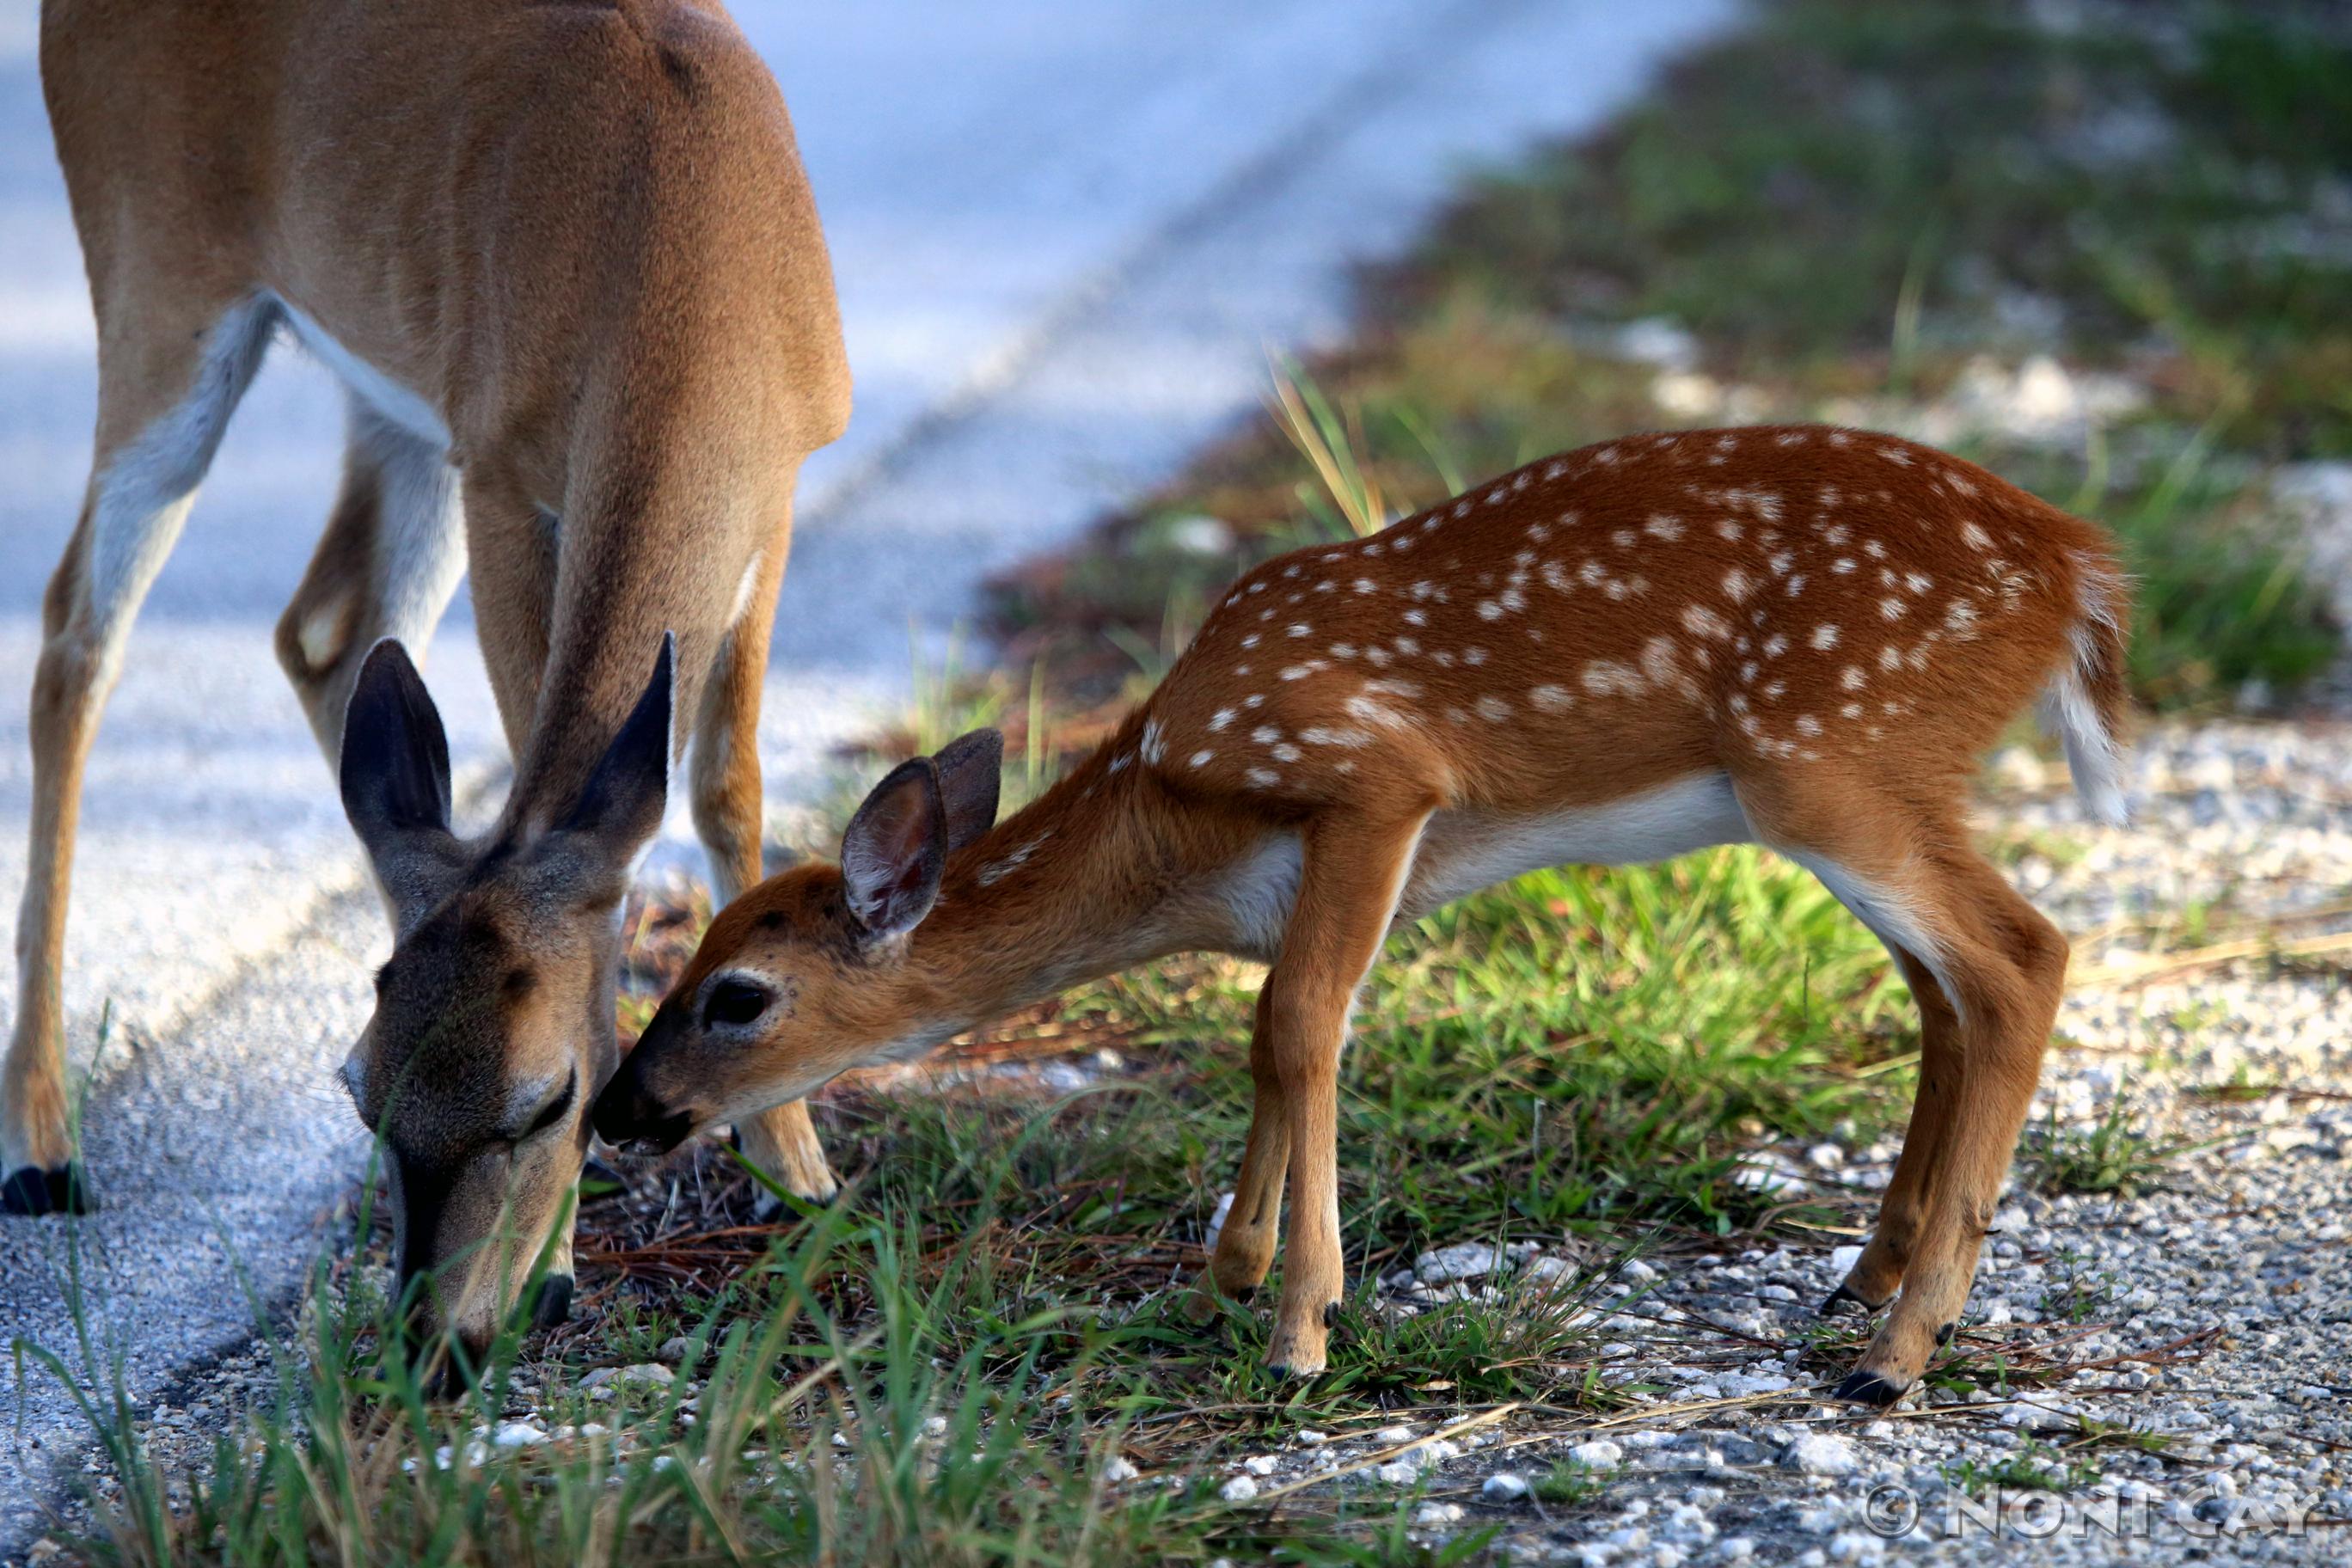 Key Deer and Fawn | Noni Cay Photography